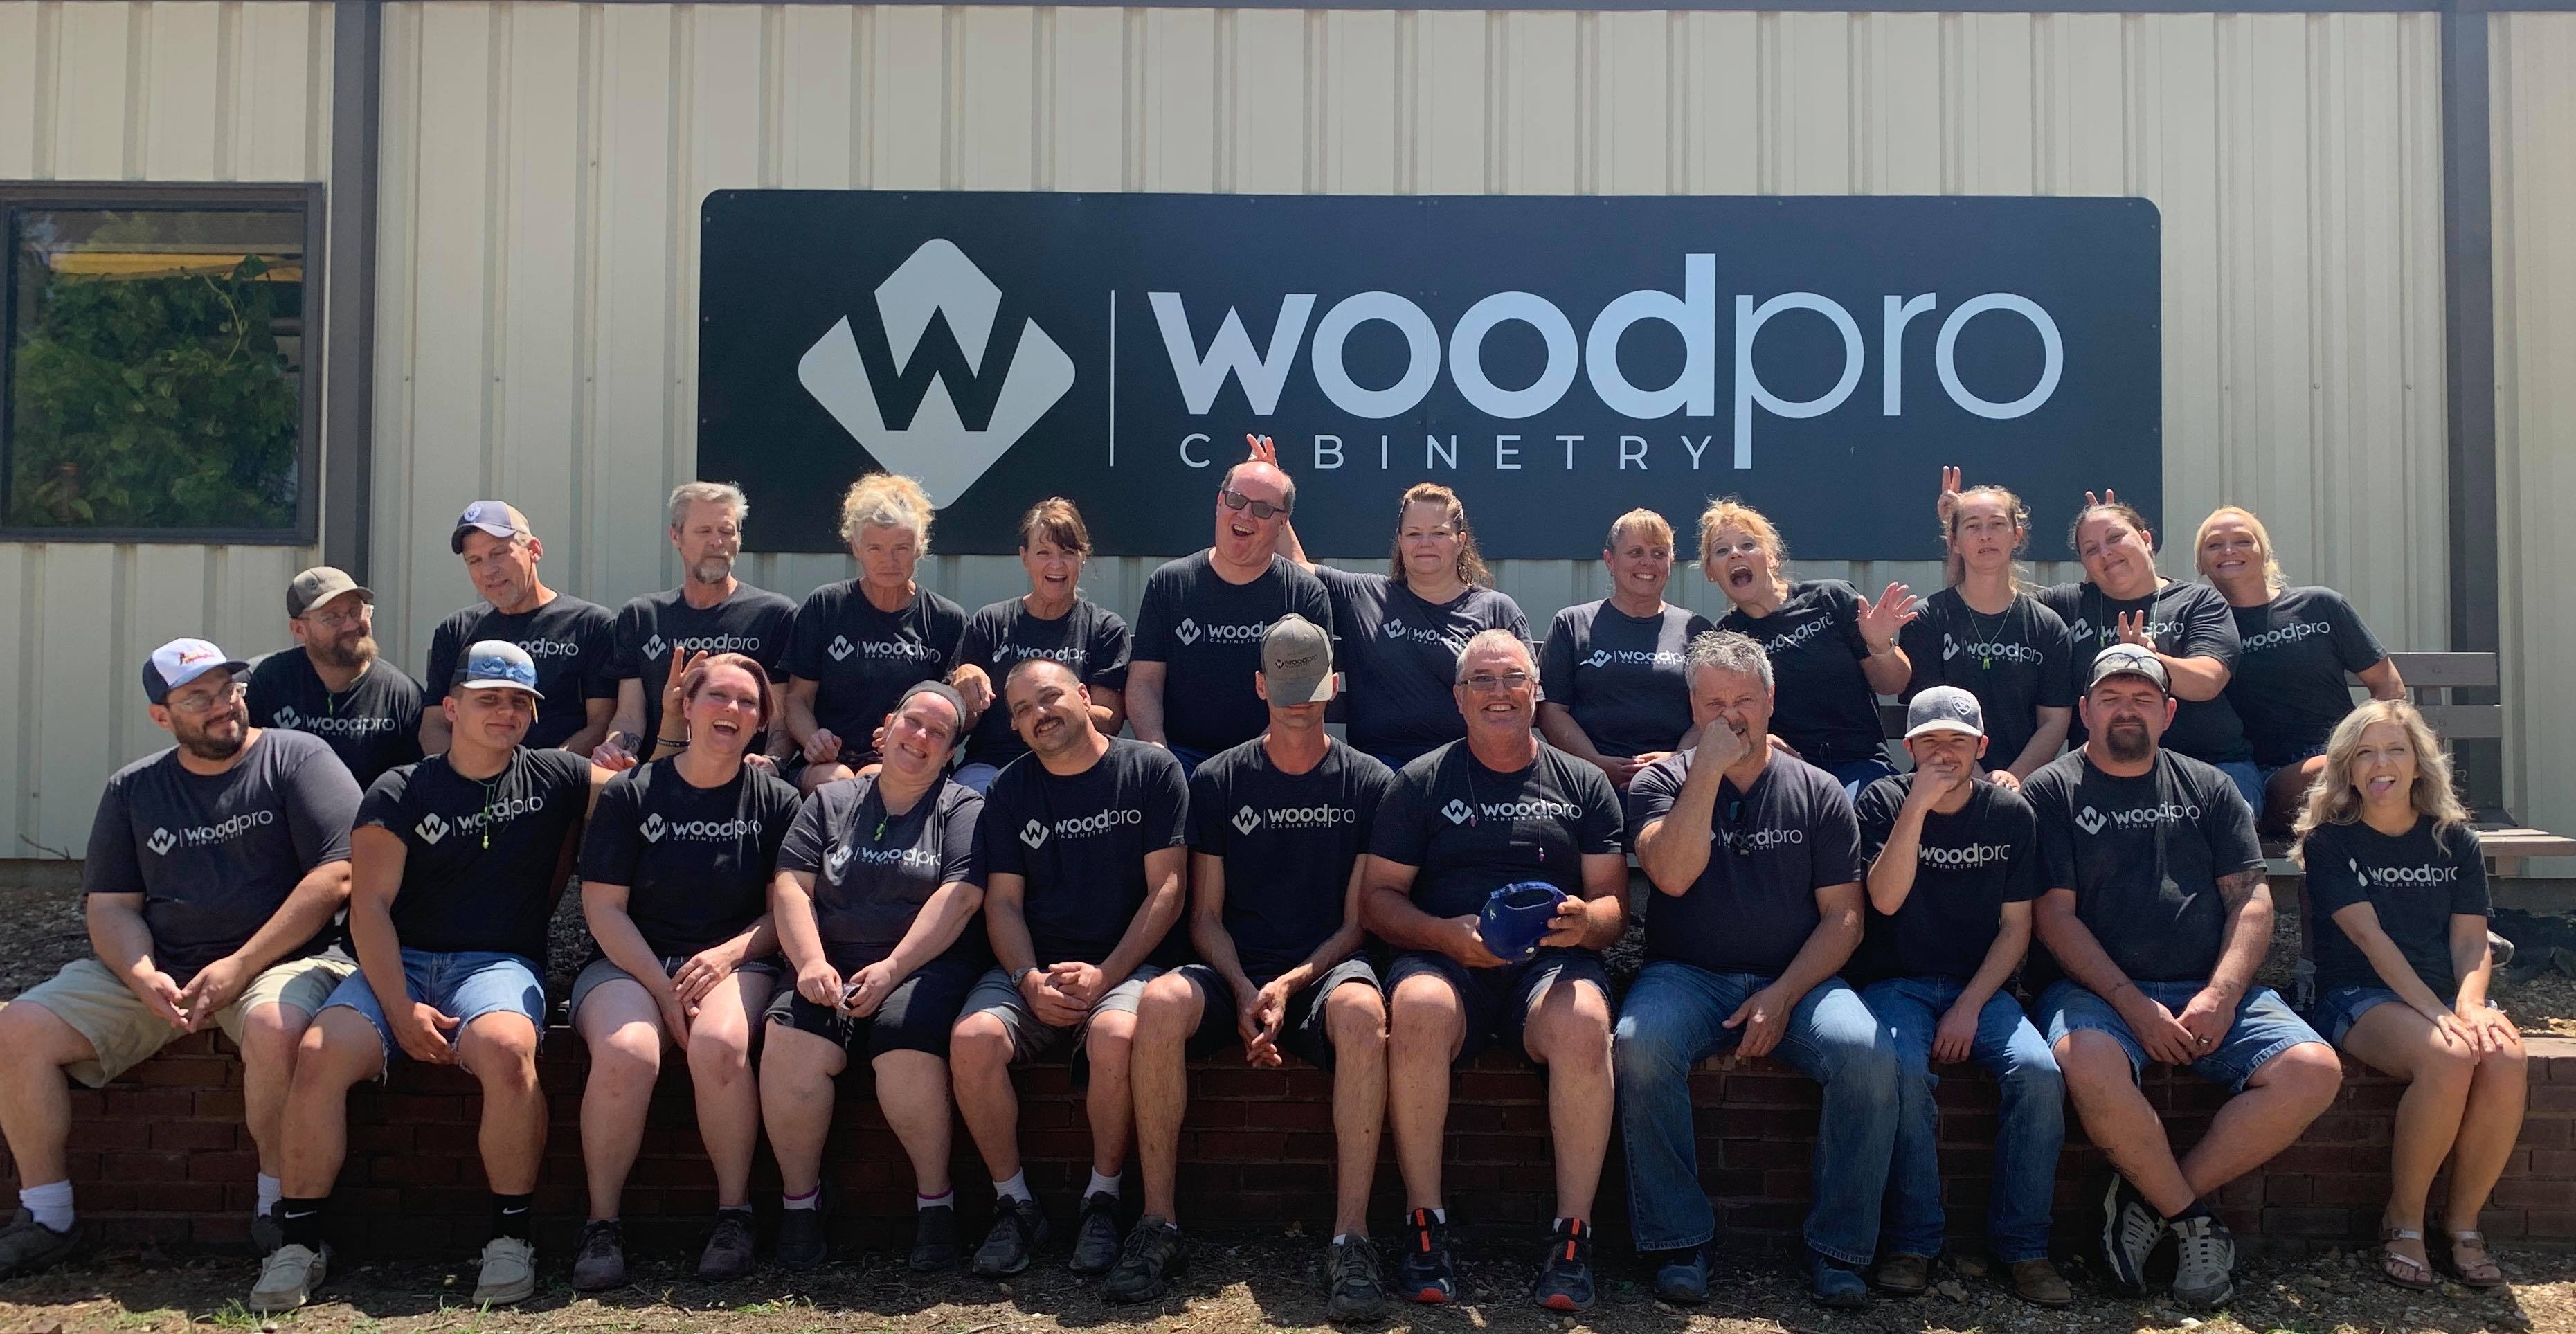 Woodpro Cabinetry Team